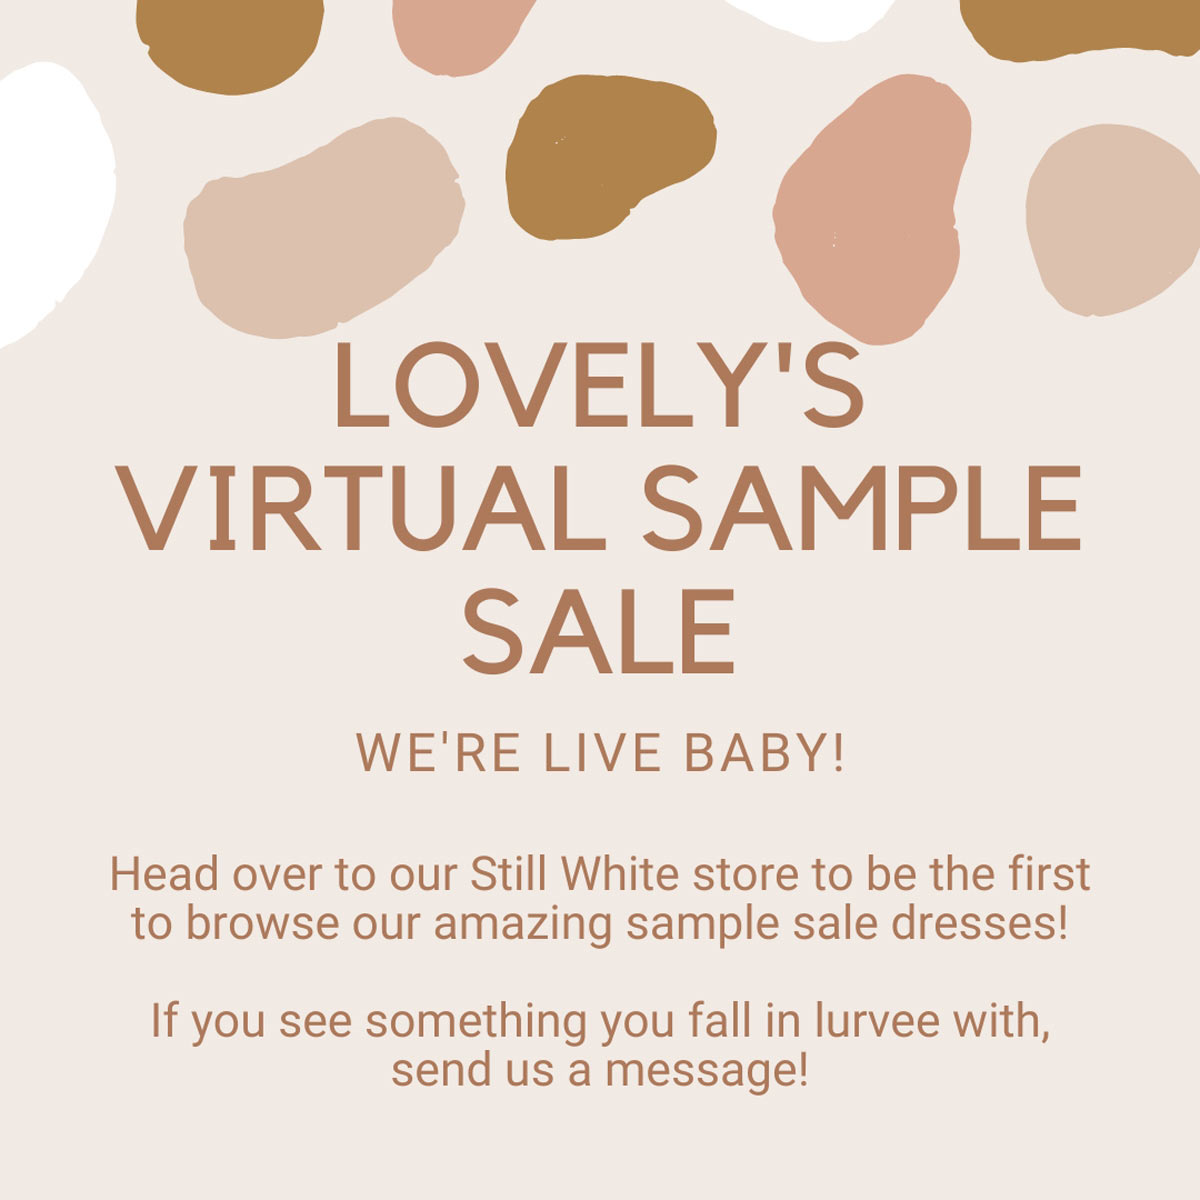 Virtual sample sale at Lovely